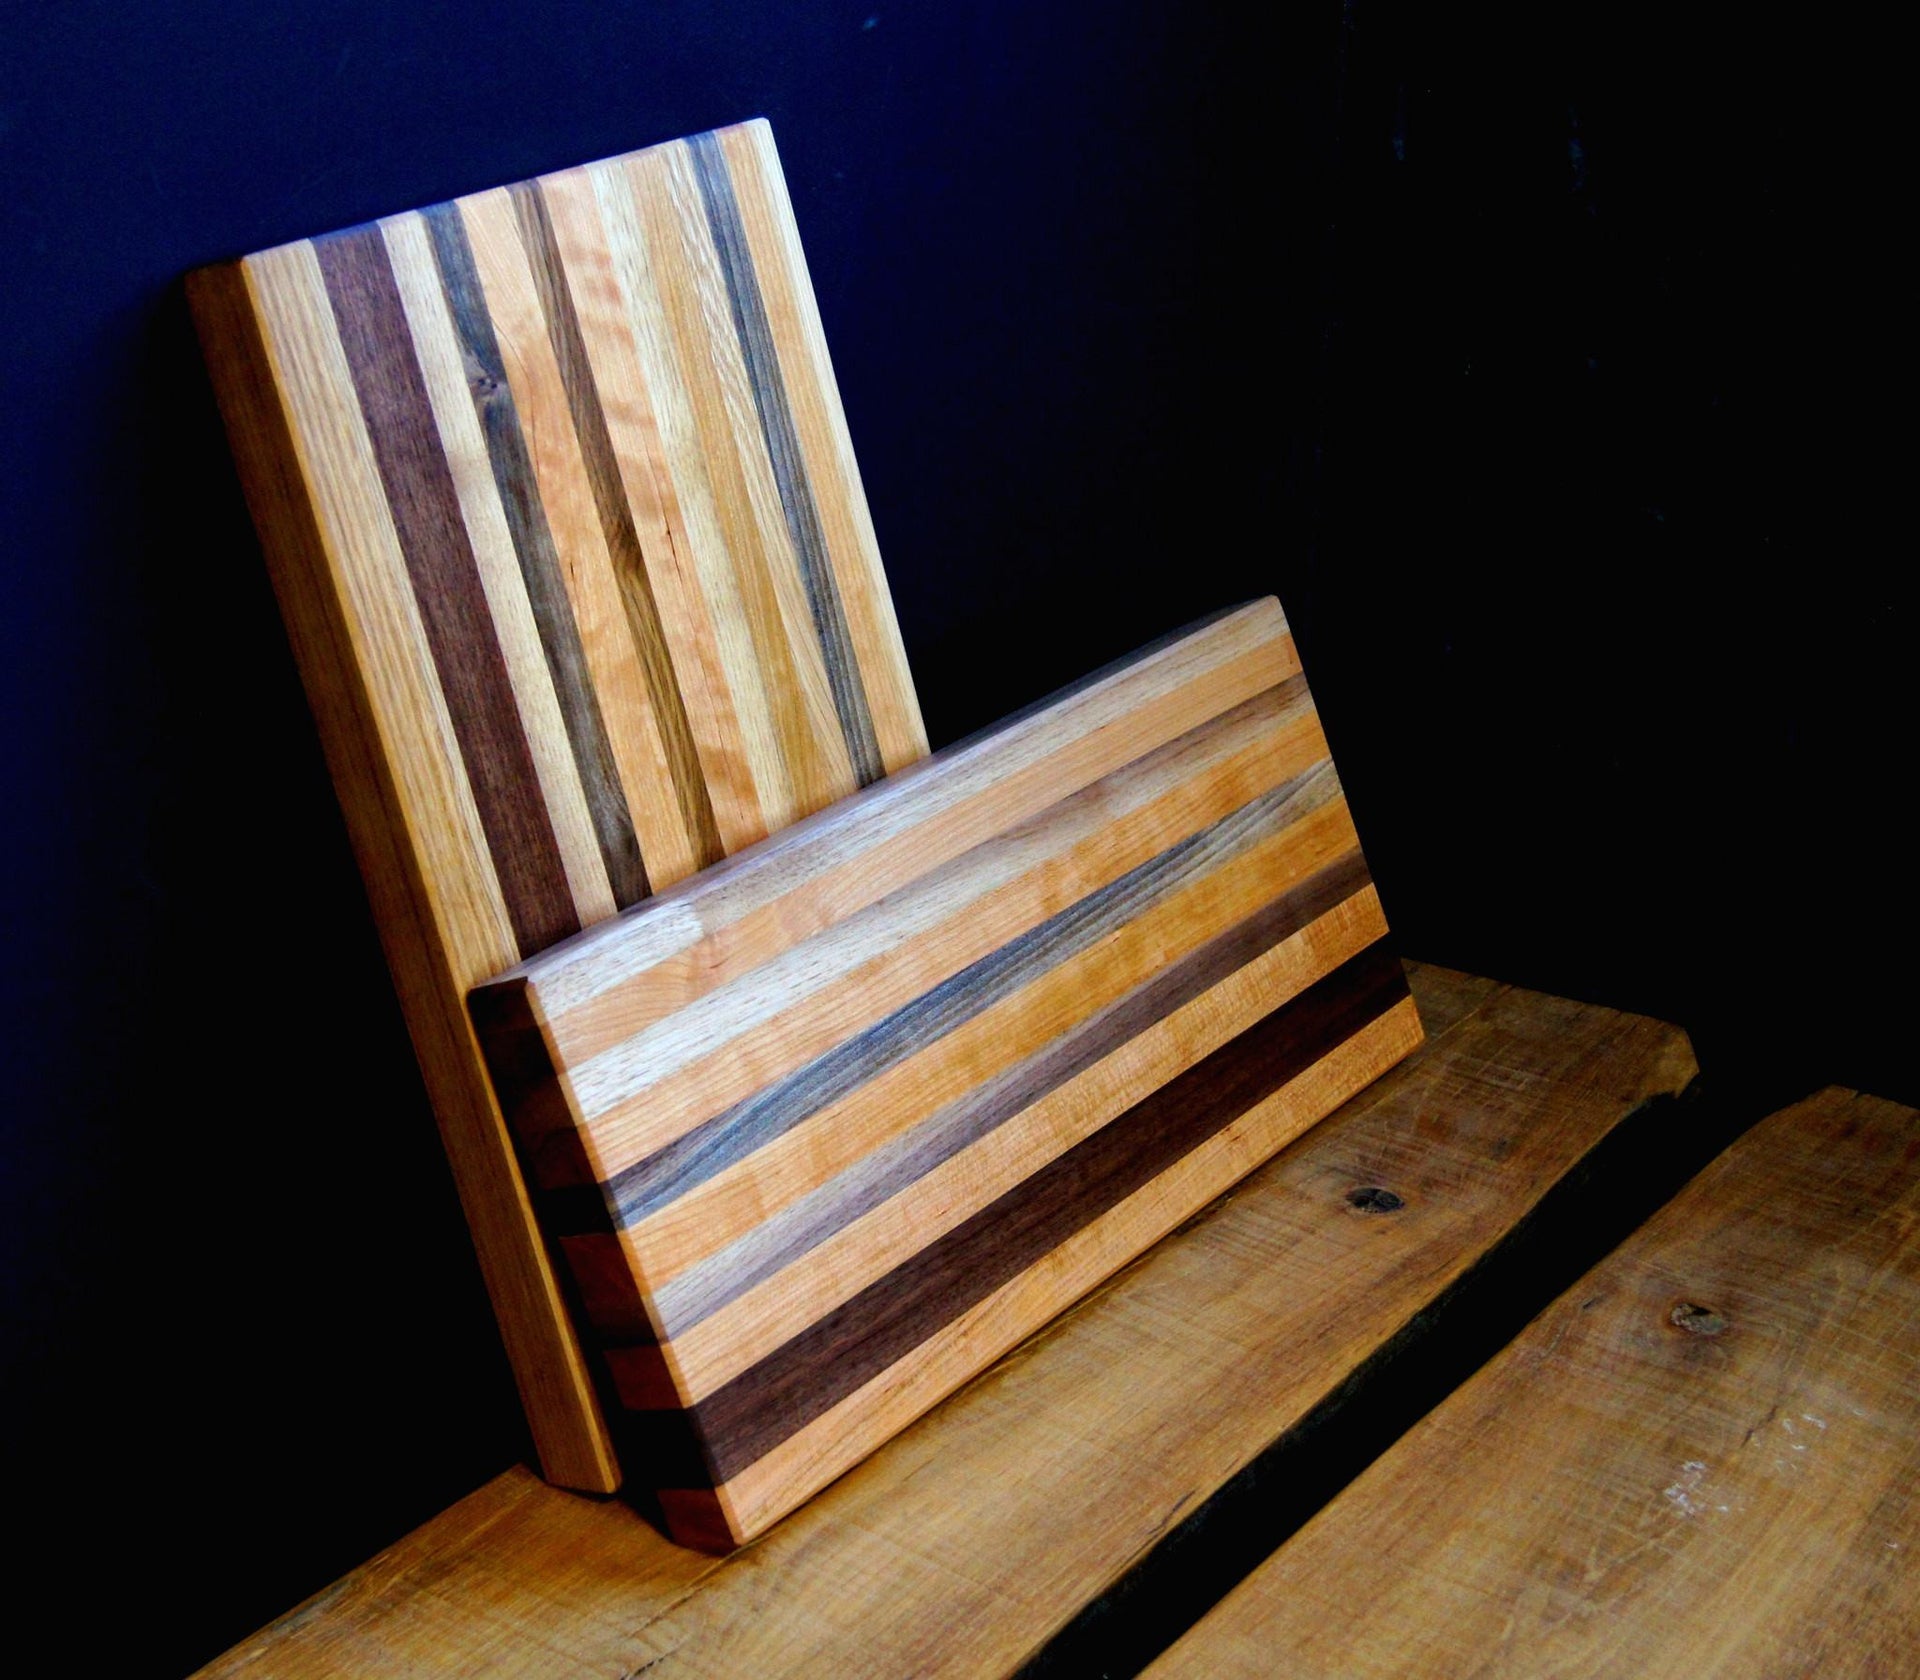 Butcher Block Cutting Boards, Artisan Made in Ohio. 100% Solid